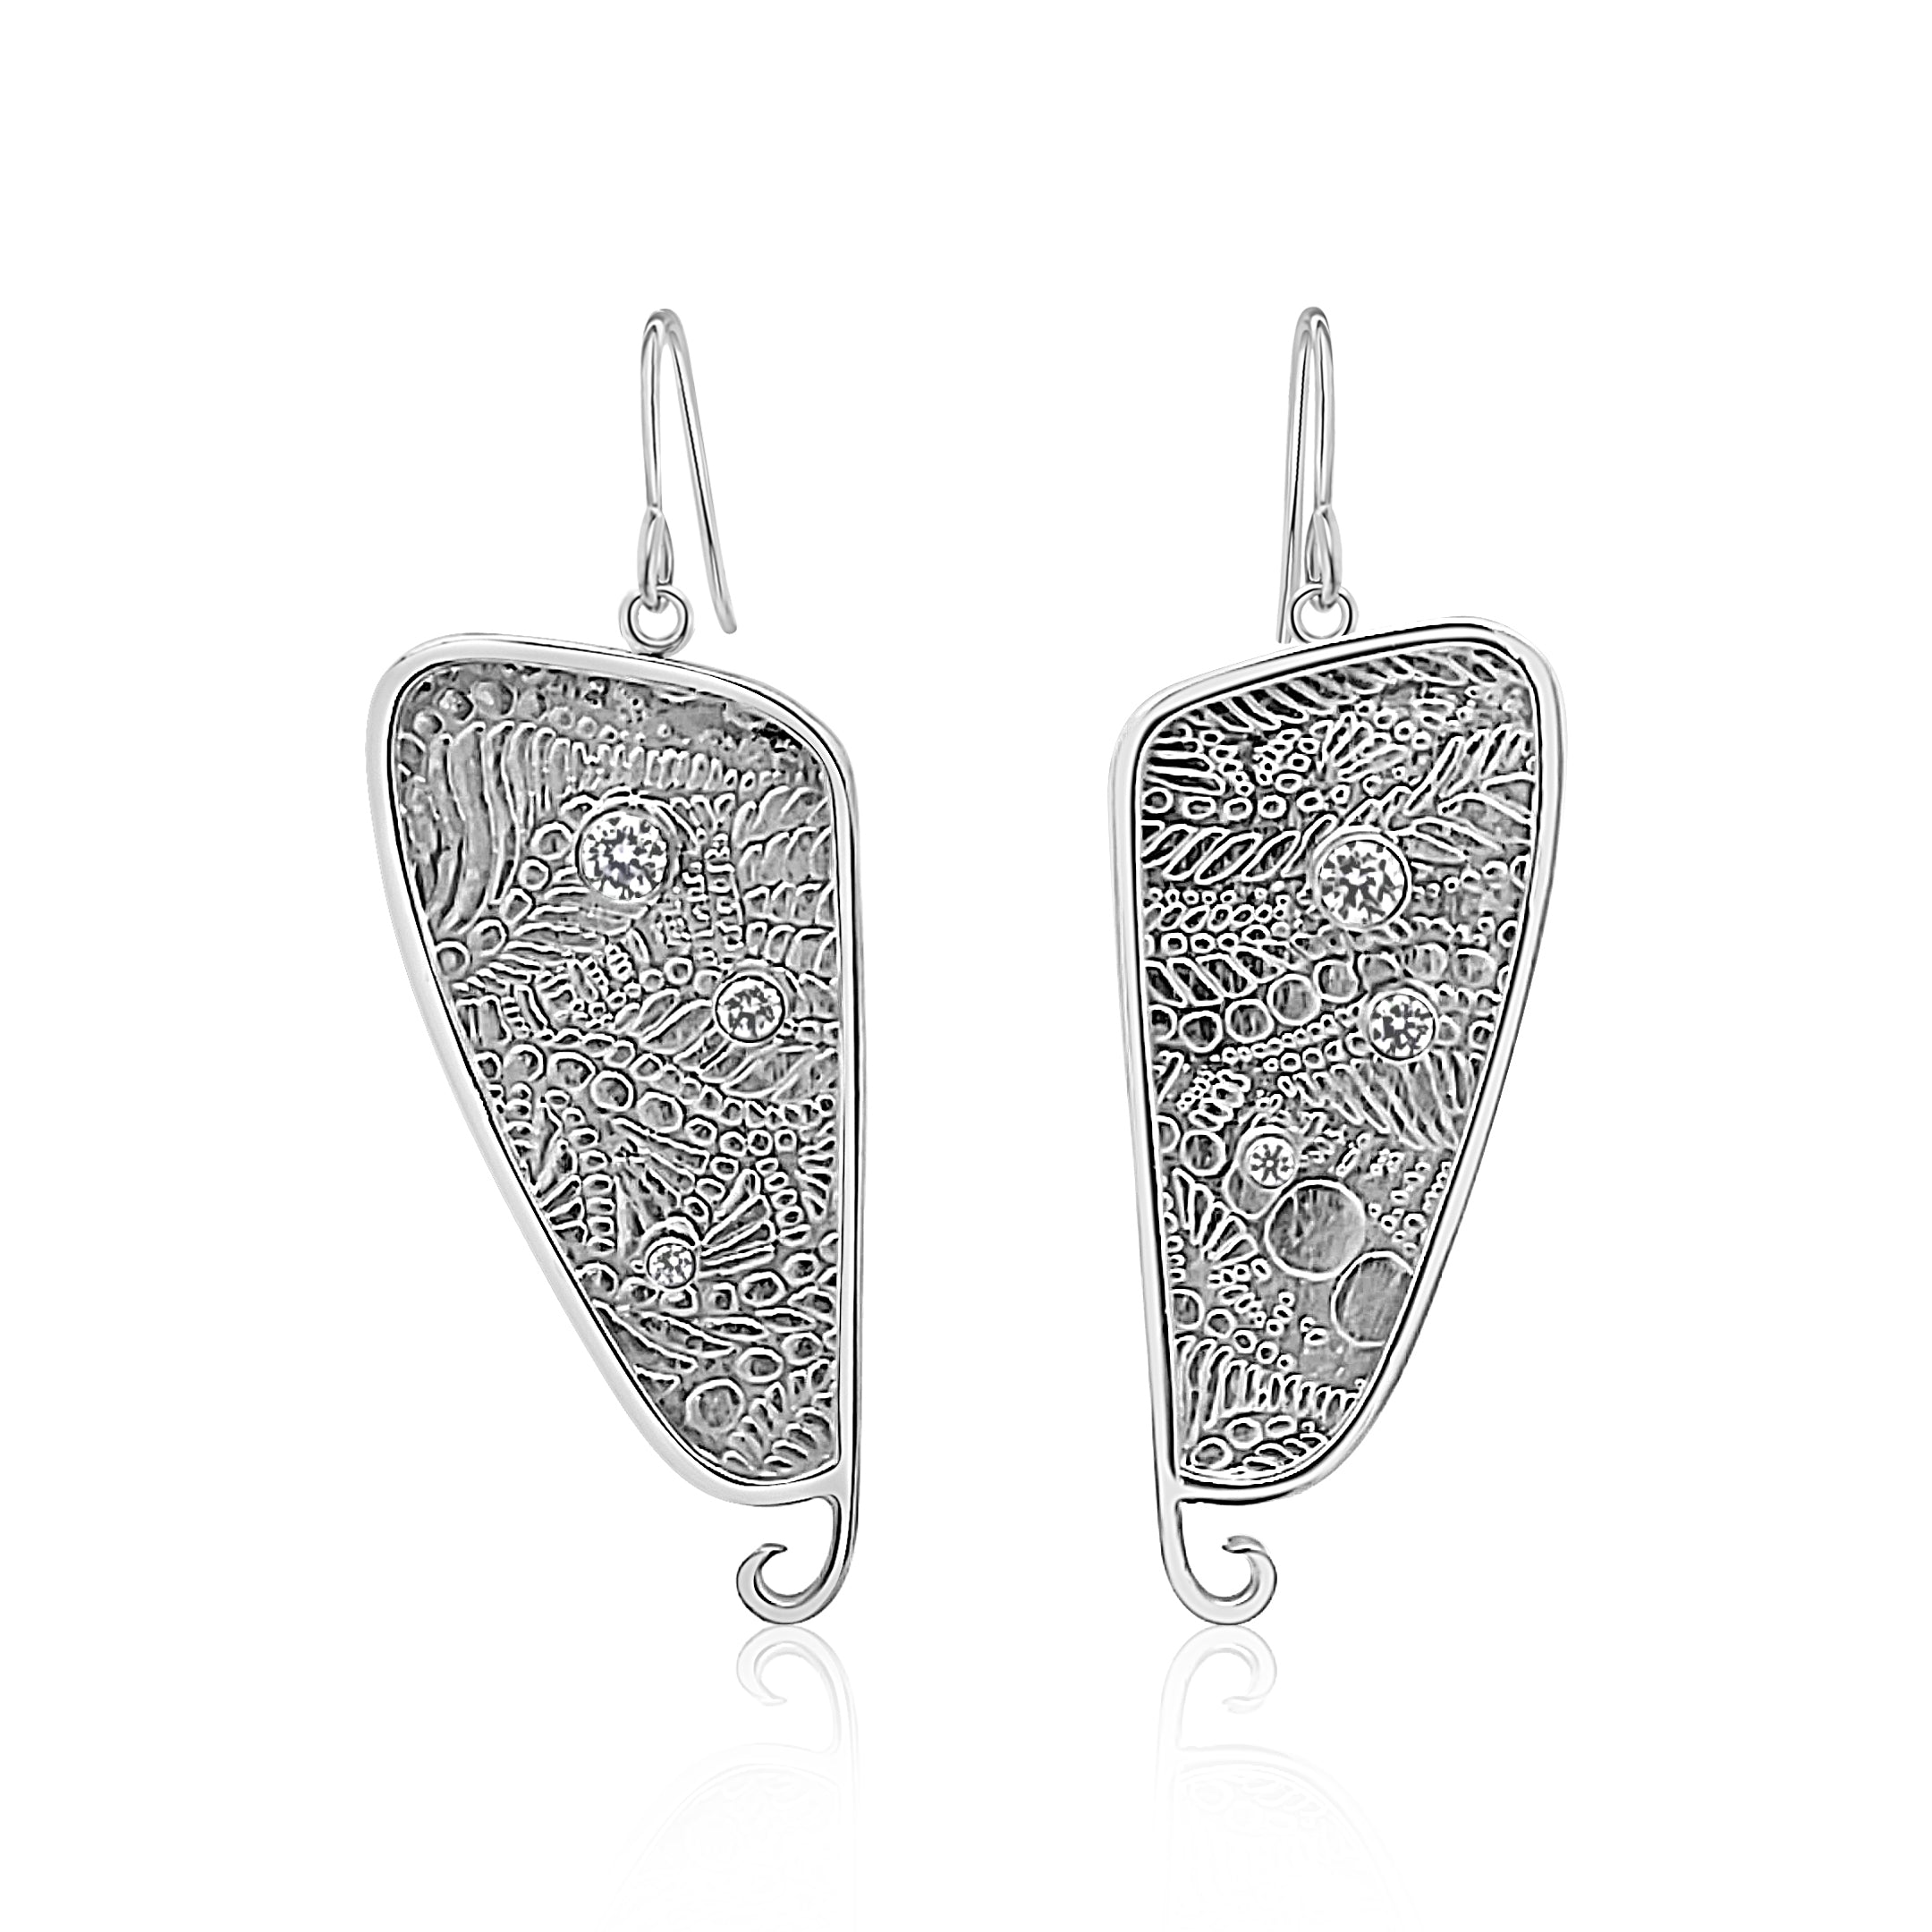 Dreamscape Pattern and Cubic Zirconia Earrings